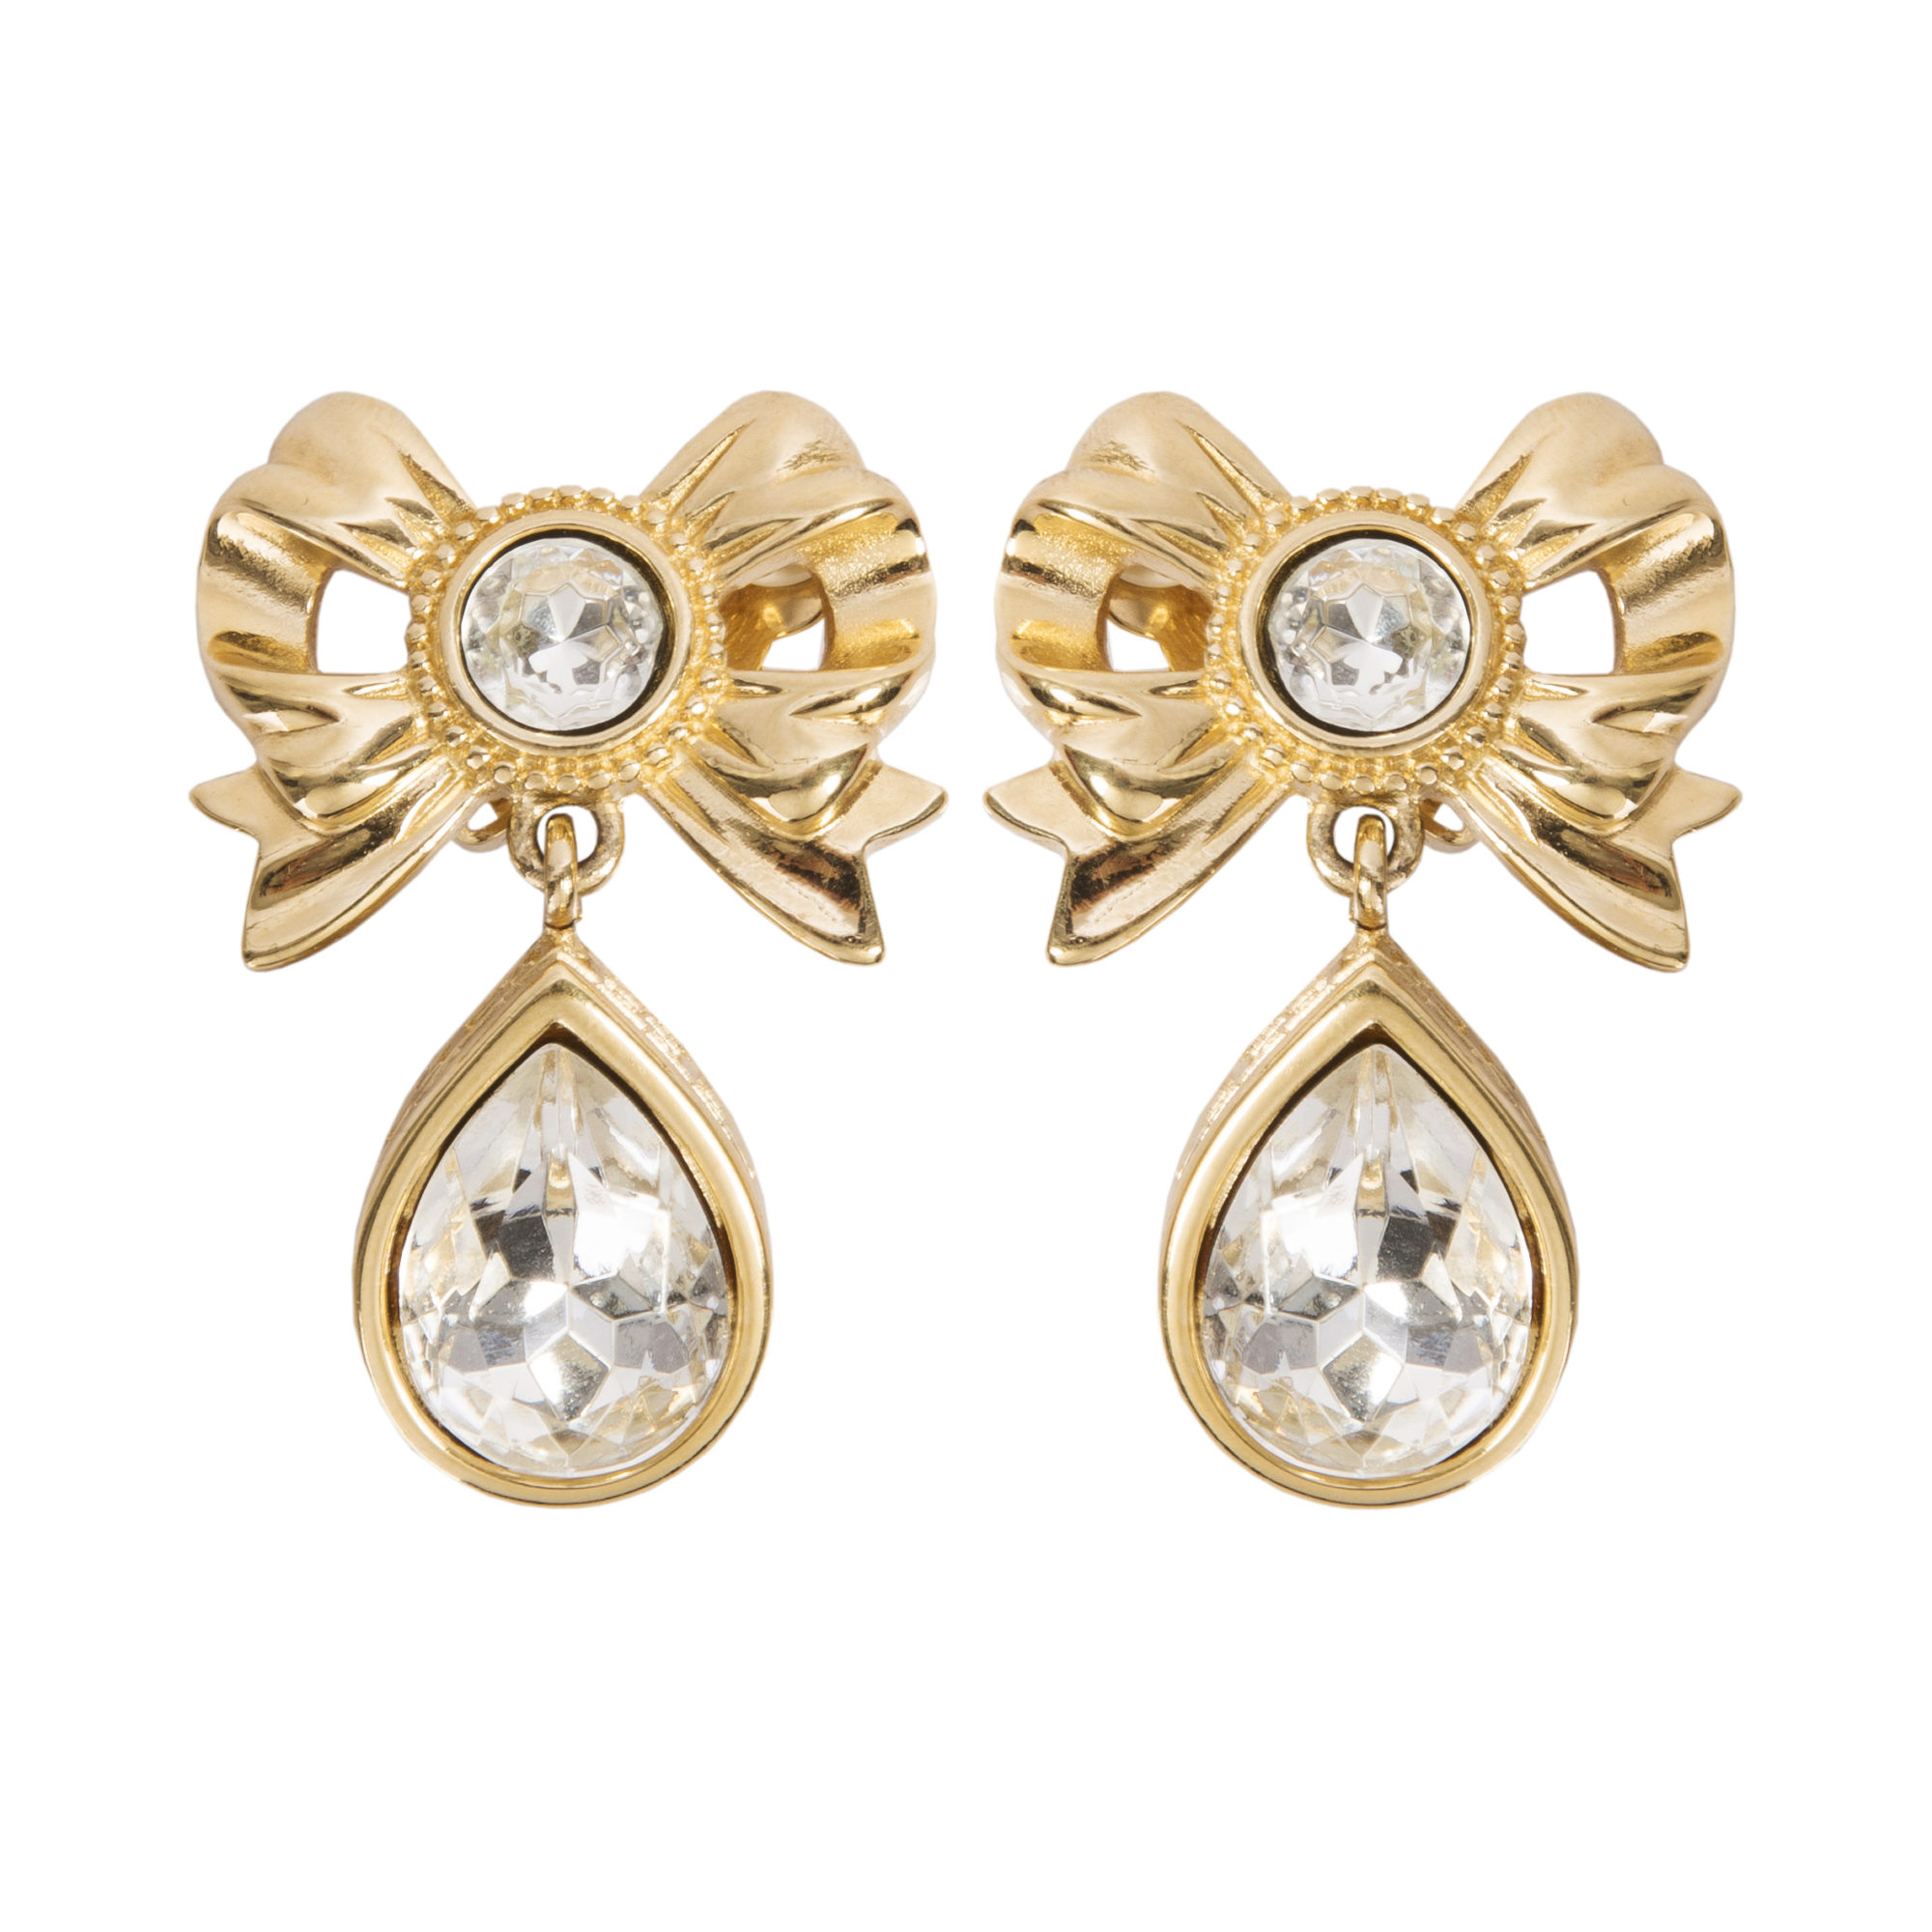 Givenchy - Vintage crystal bow gold earrings - 4element